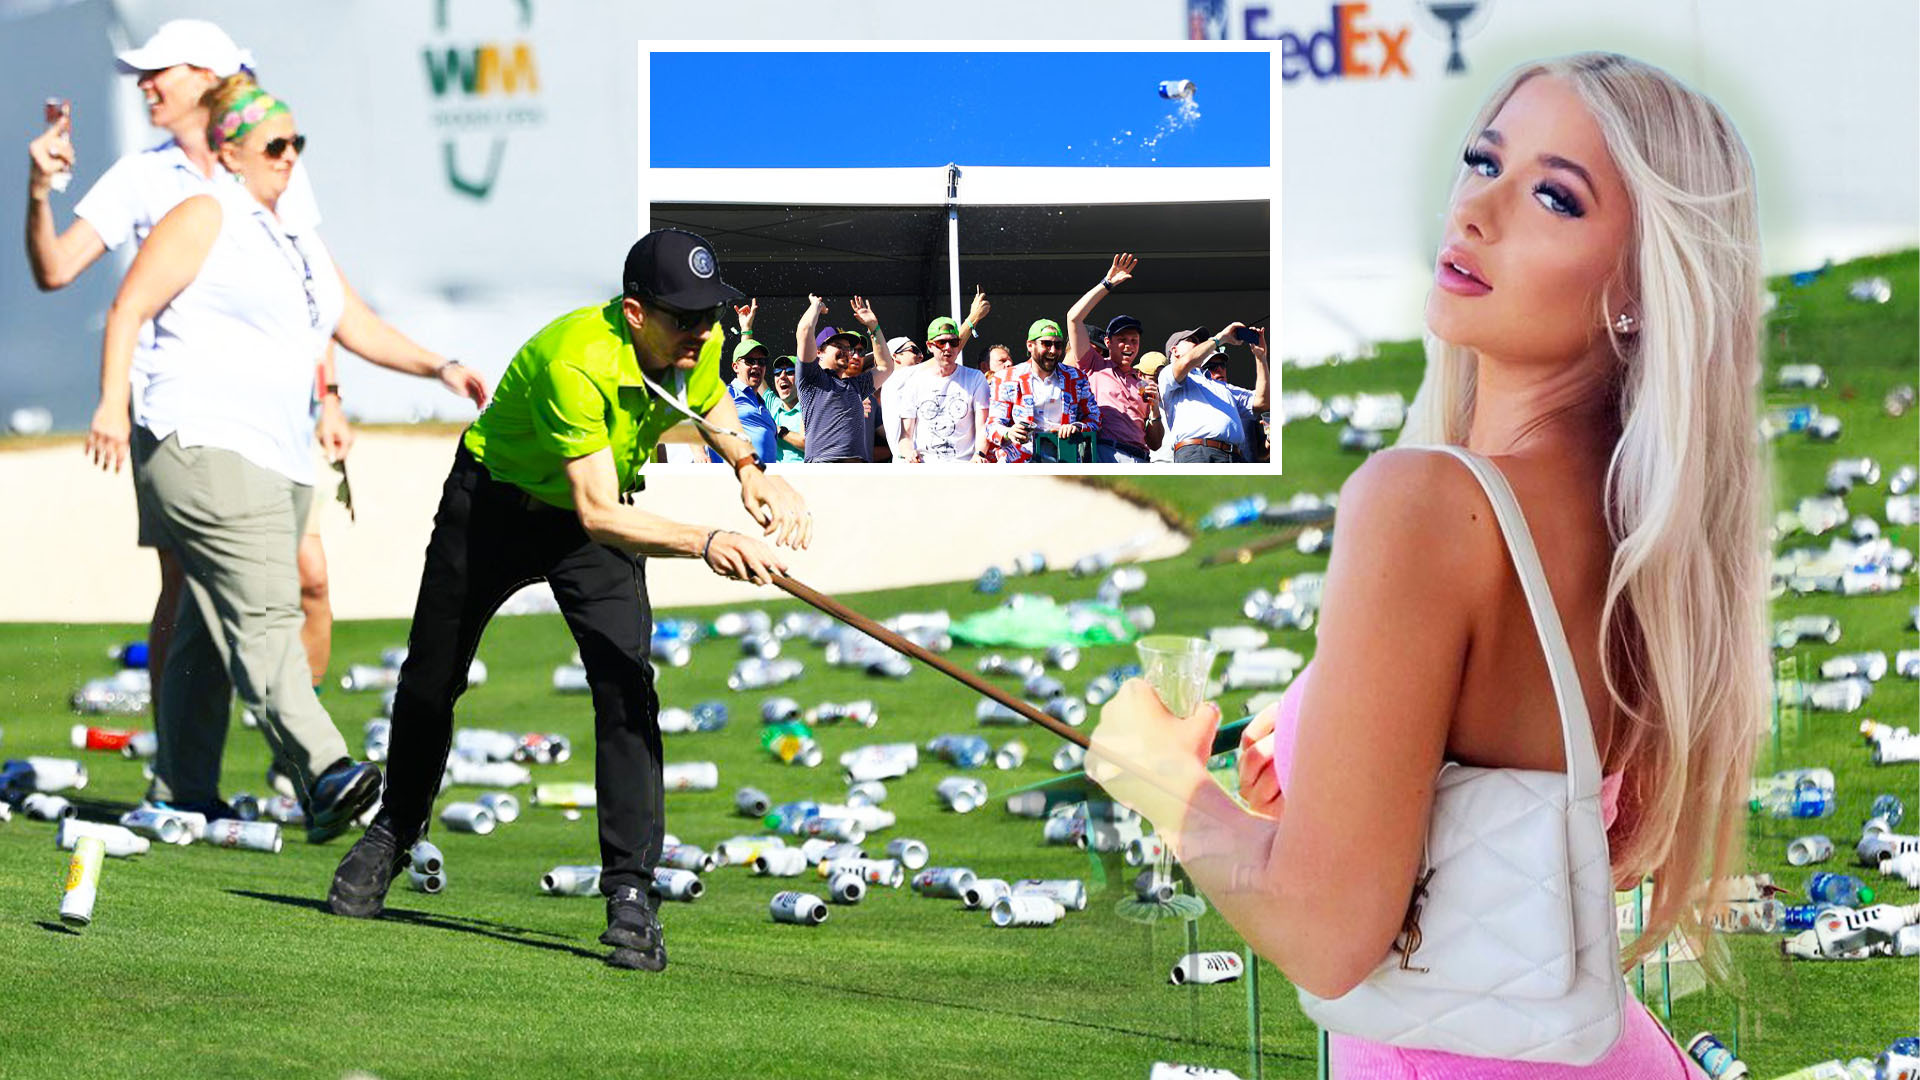 Inside the wildest week of golf at the WM Phoenix Open, where the 16th hole becomes a Spring Break party